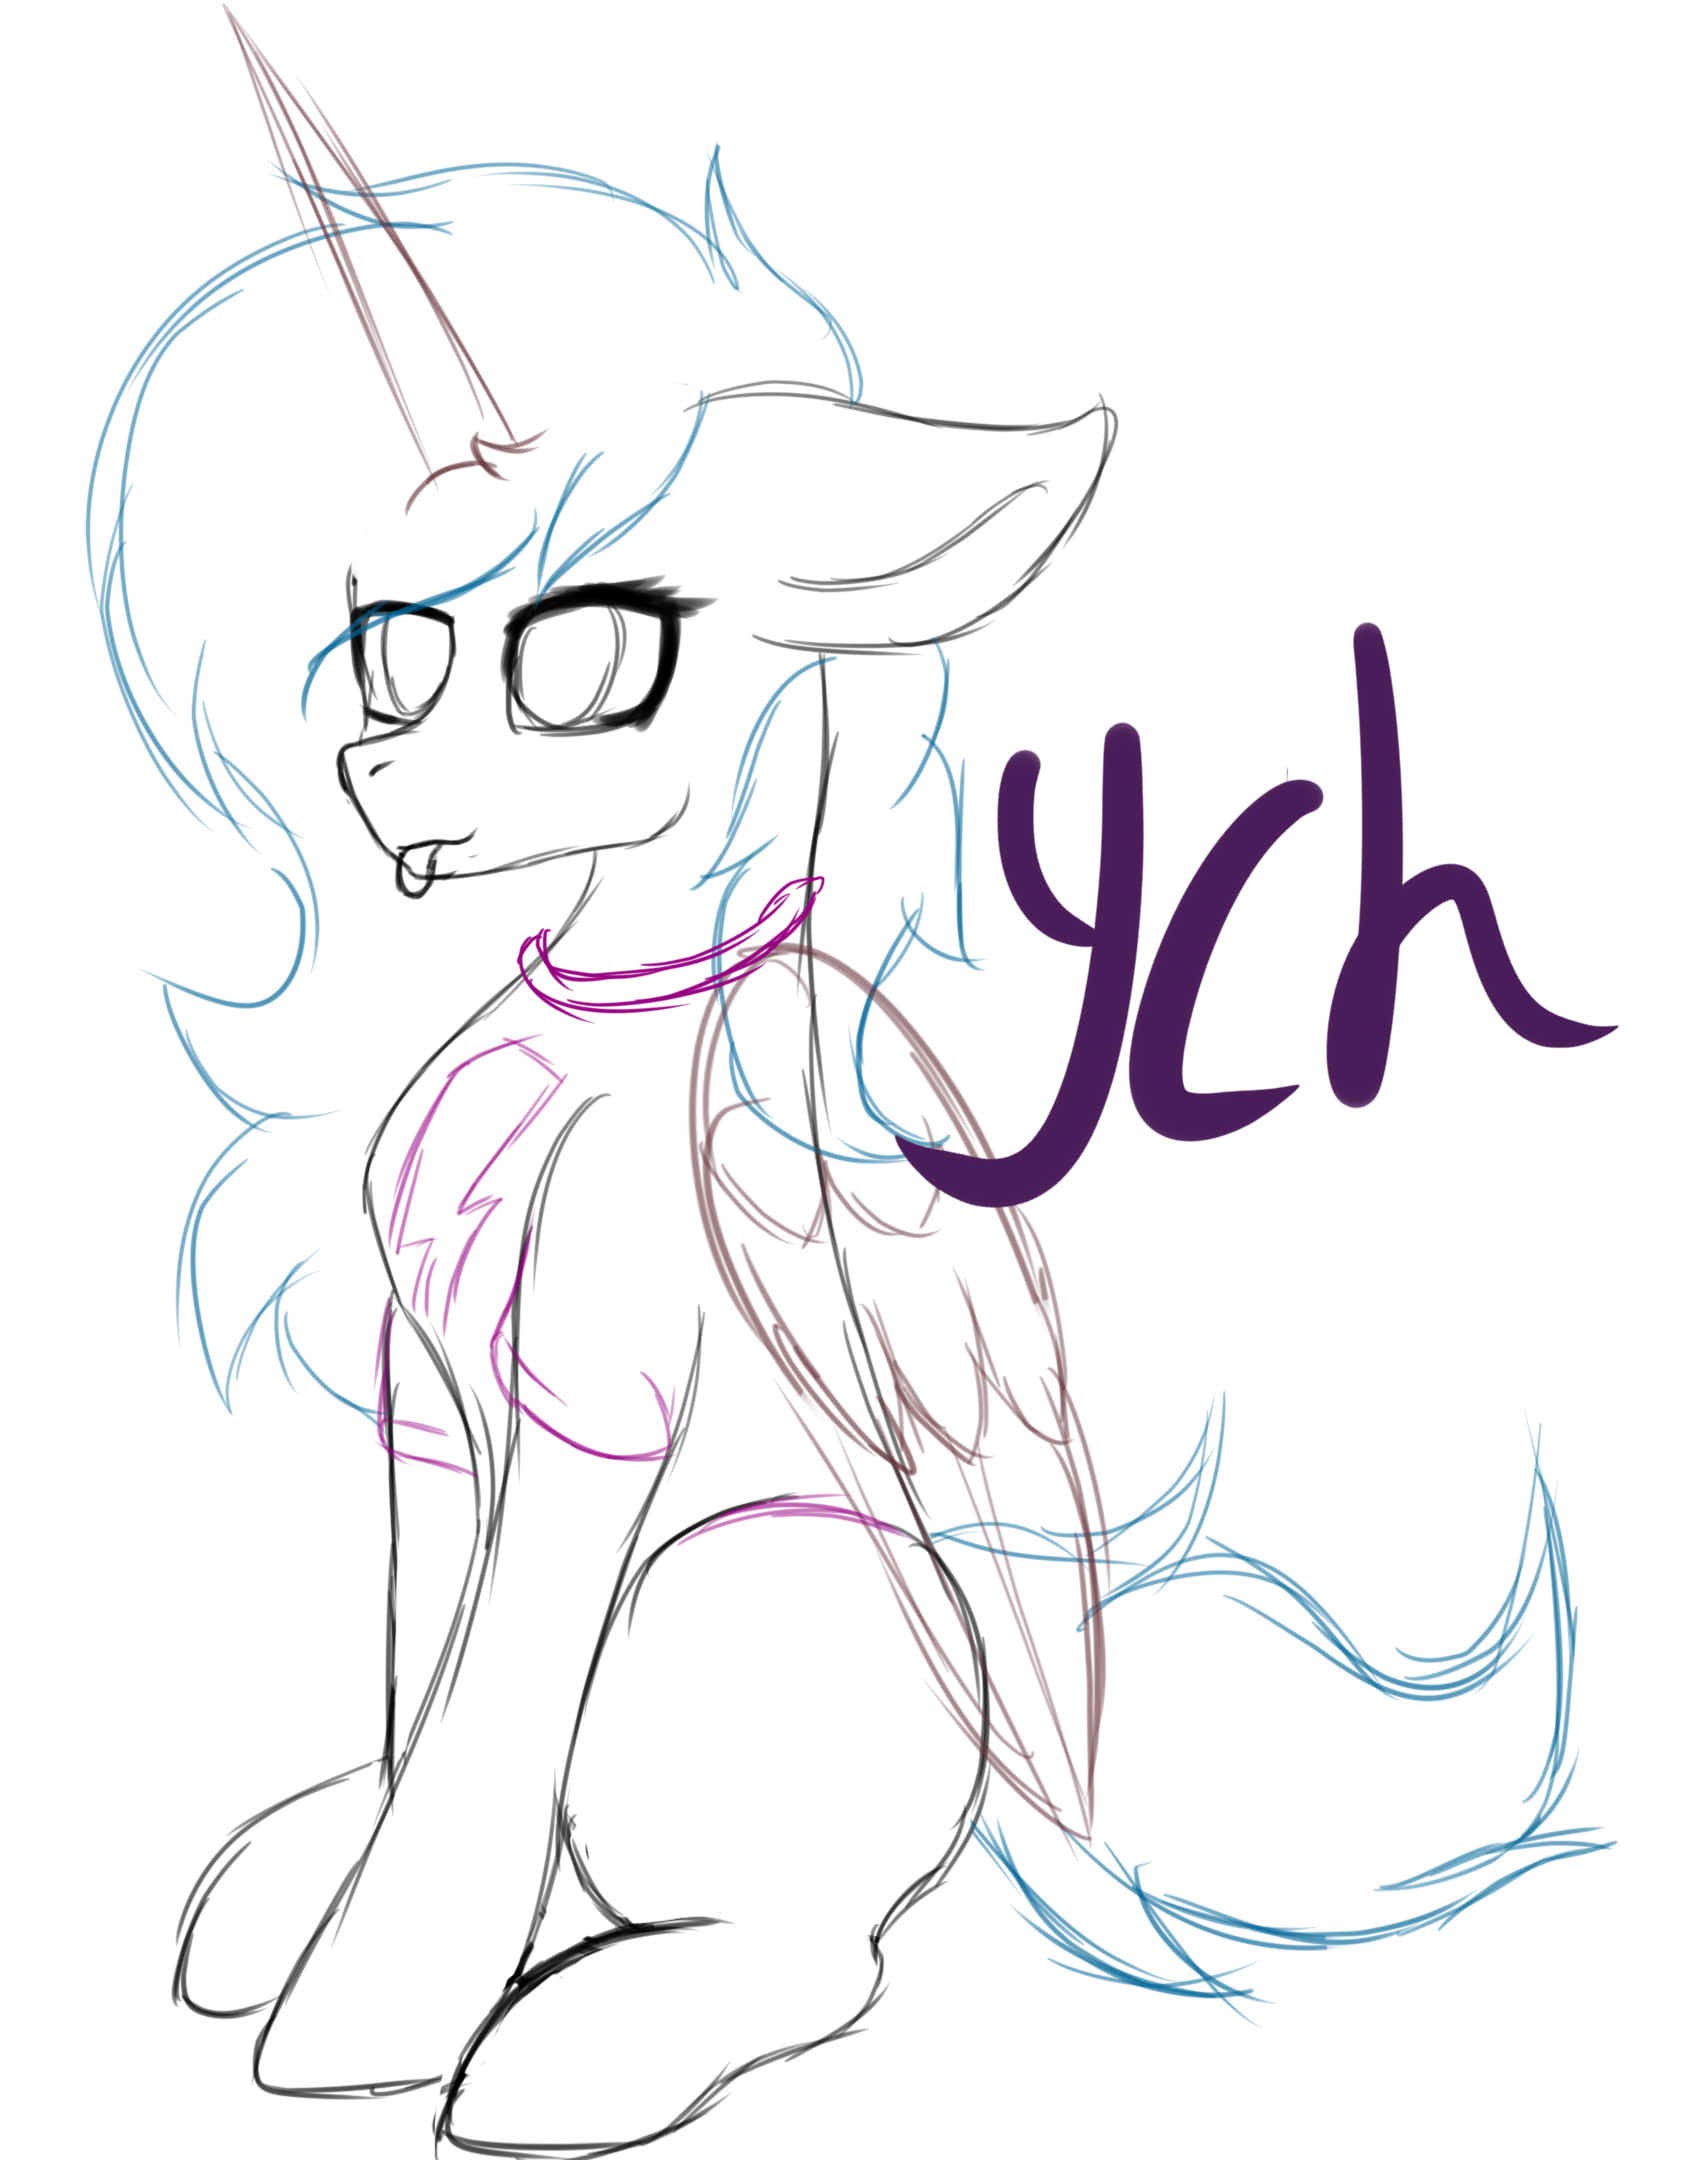 Cute pony - YCH.Commishes.